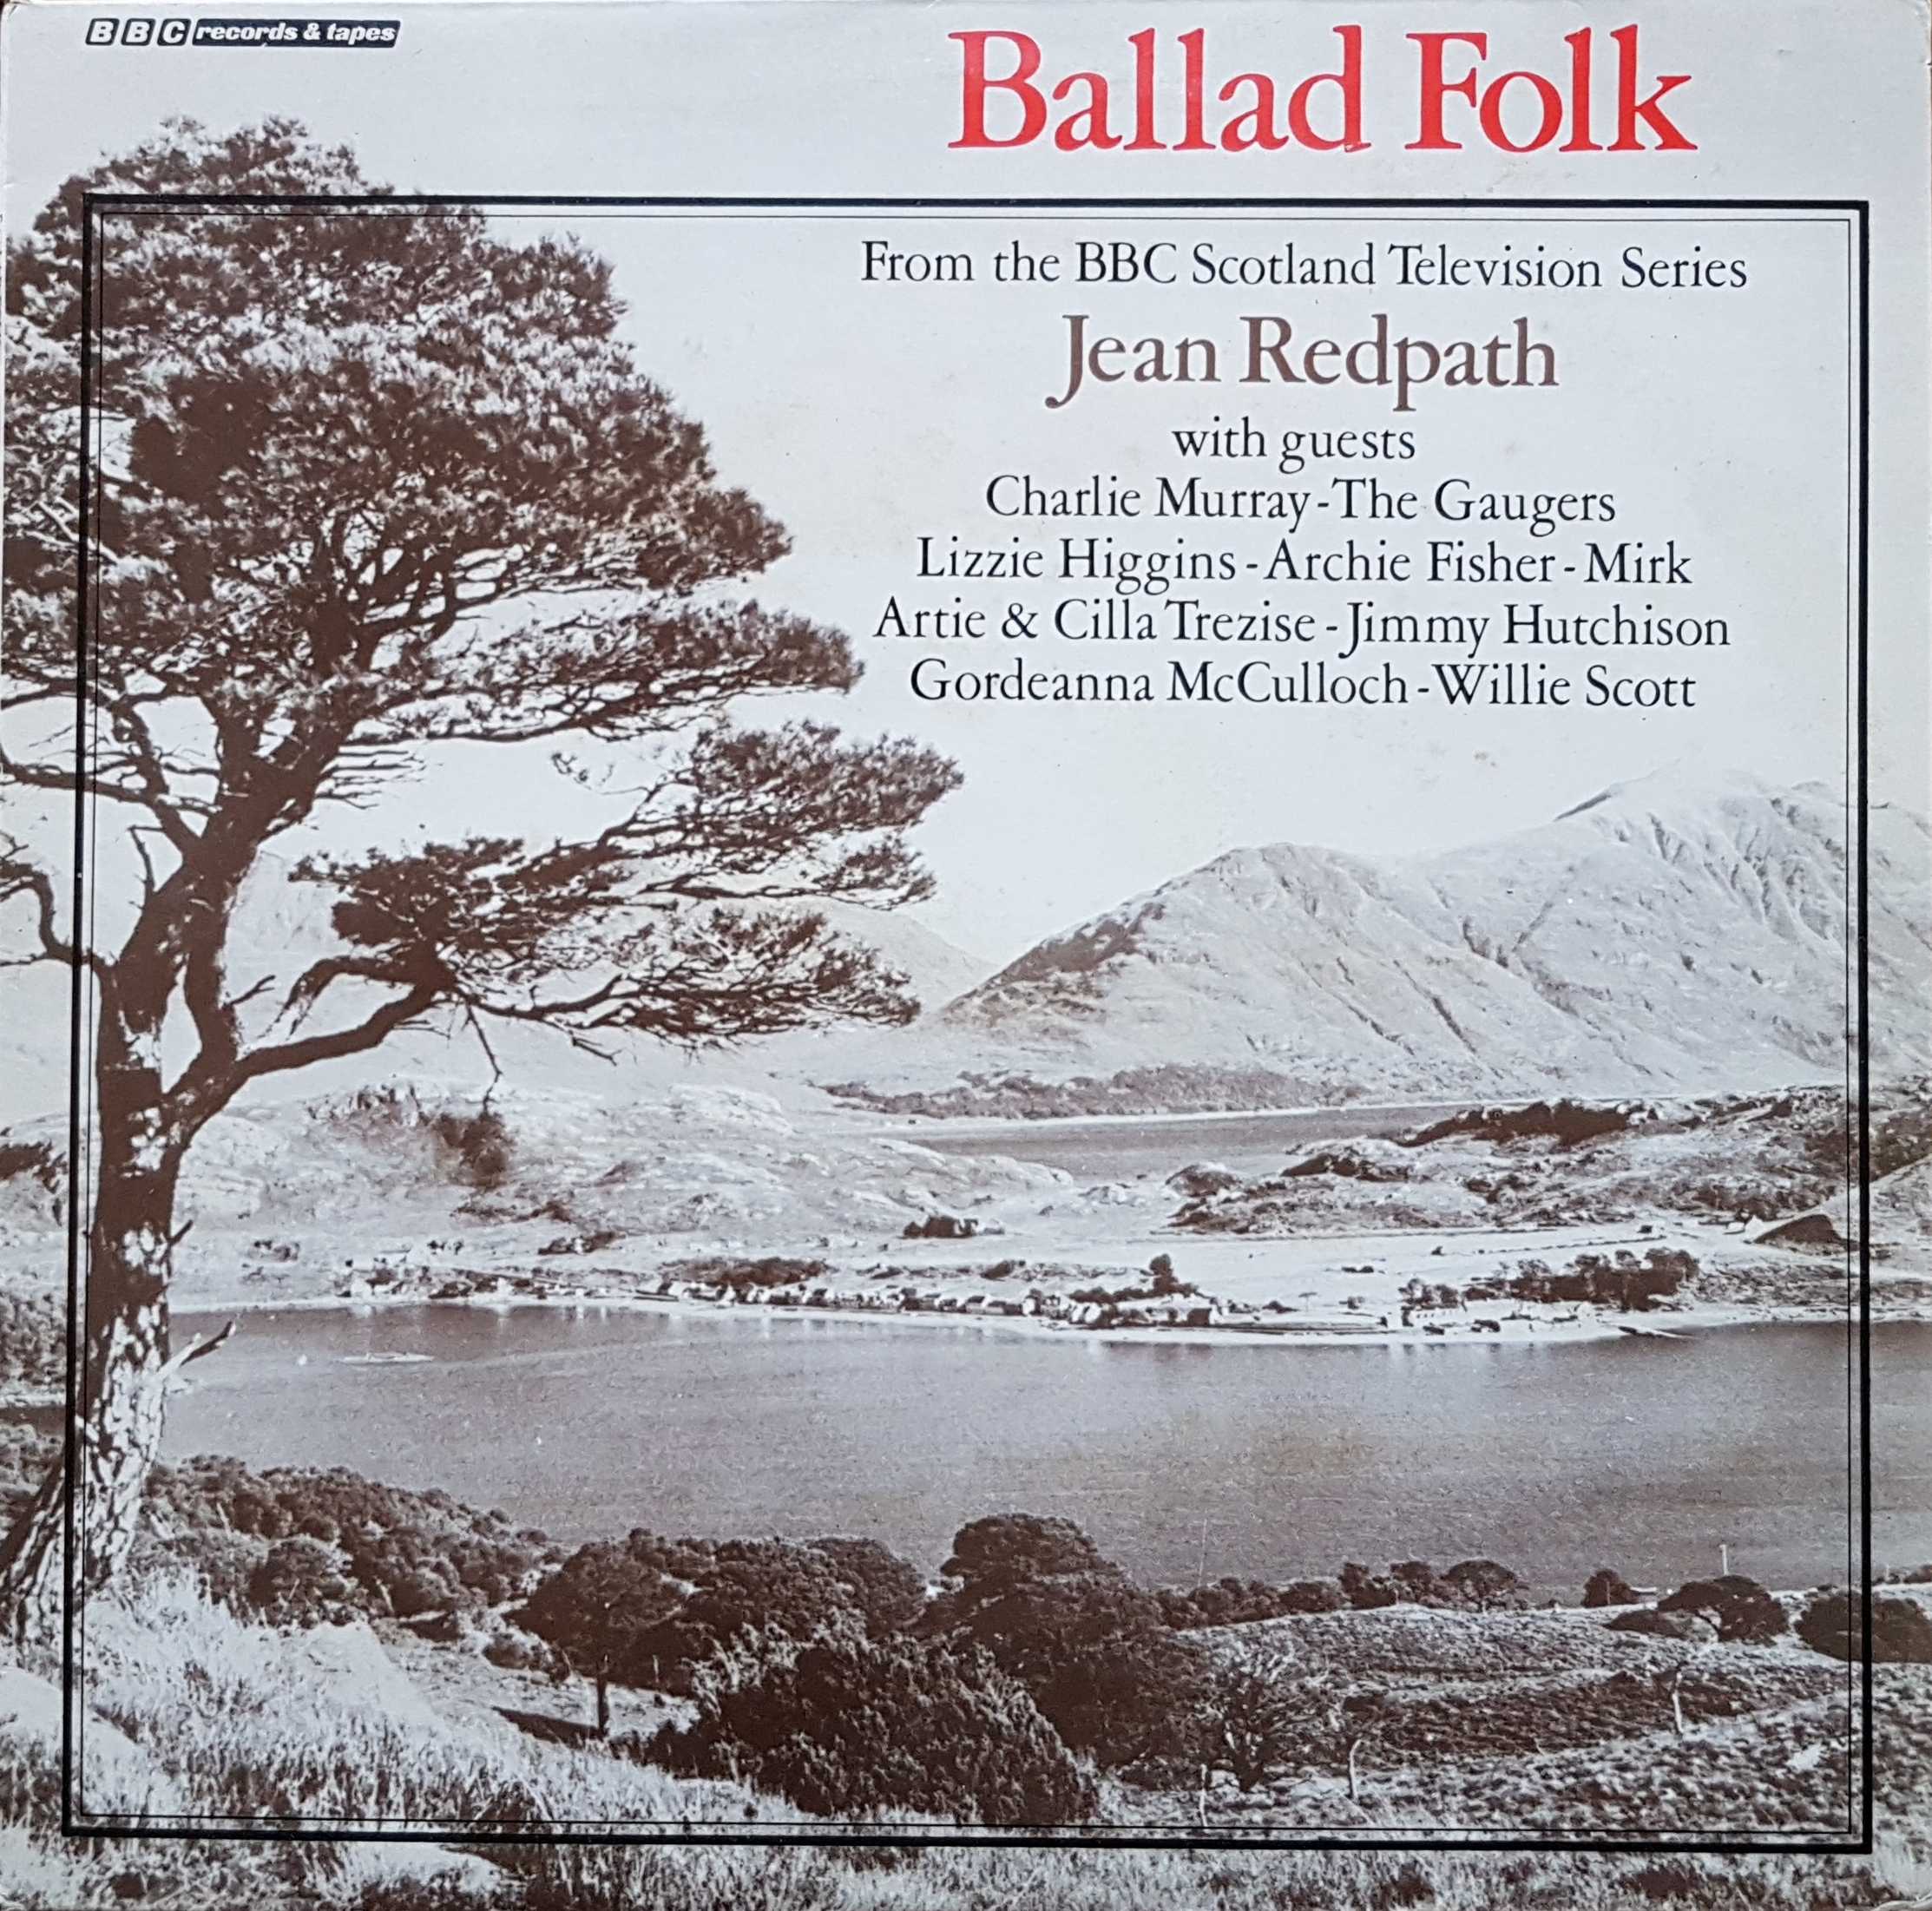 Picture of REC 293 Ballad folk by artist Various from the BBC albums - Records and Tapes library